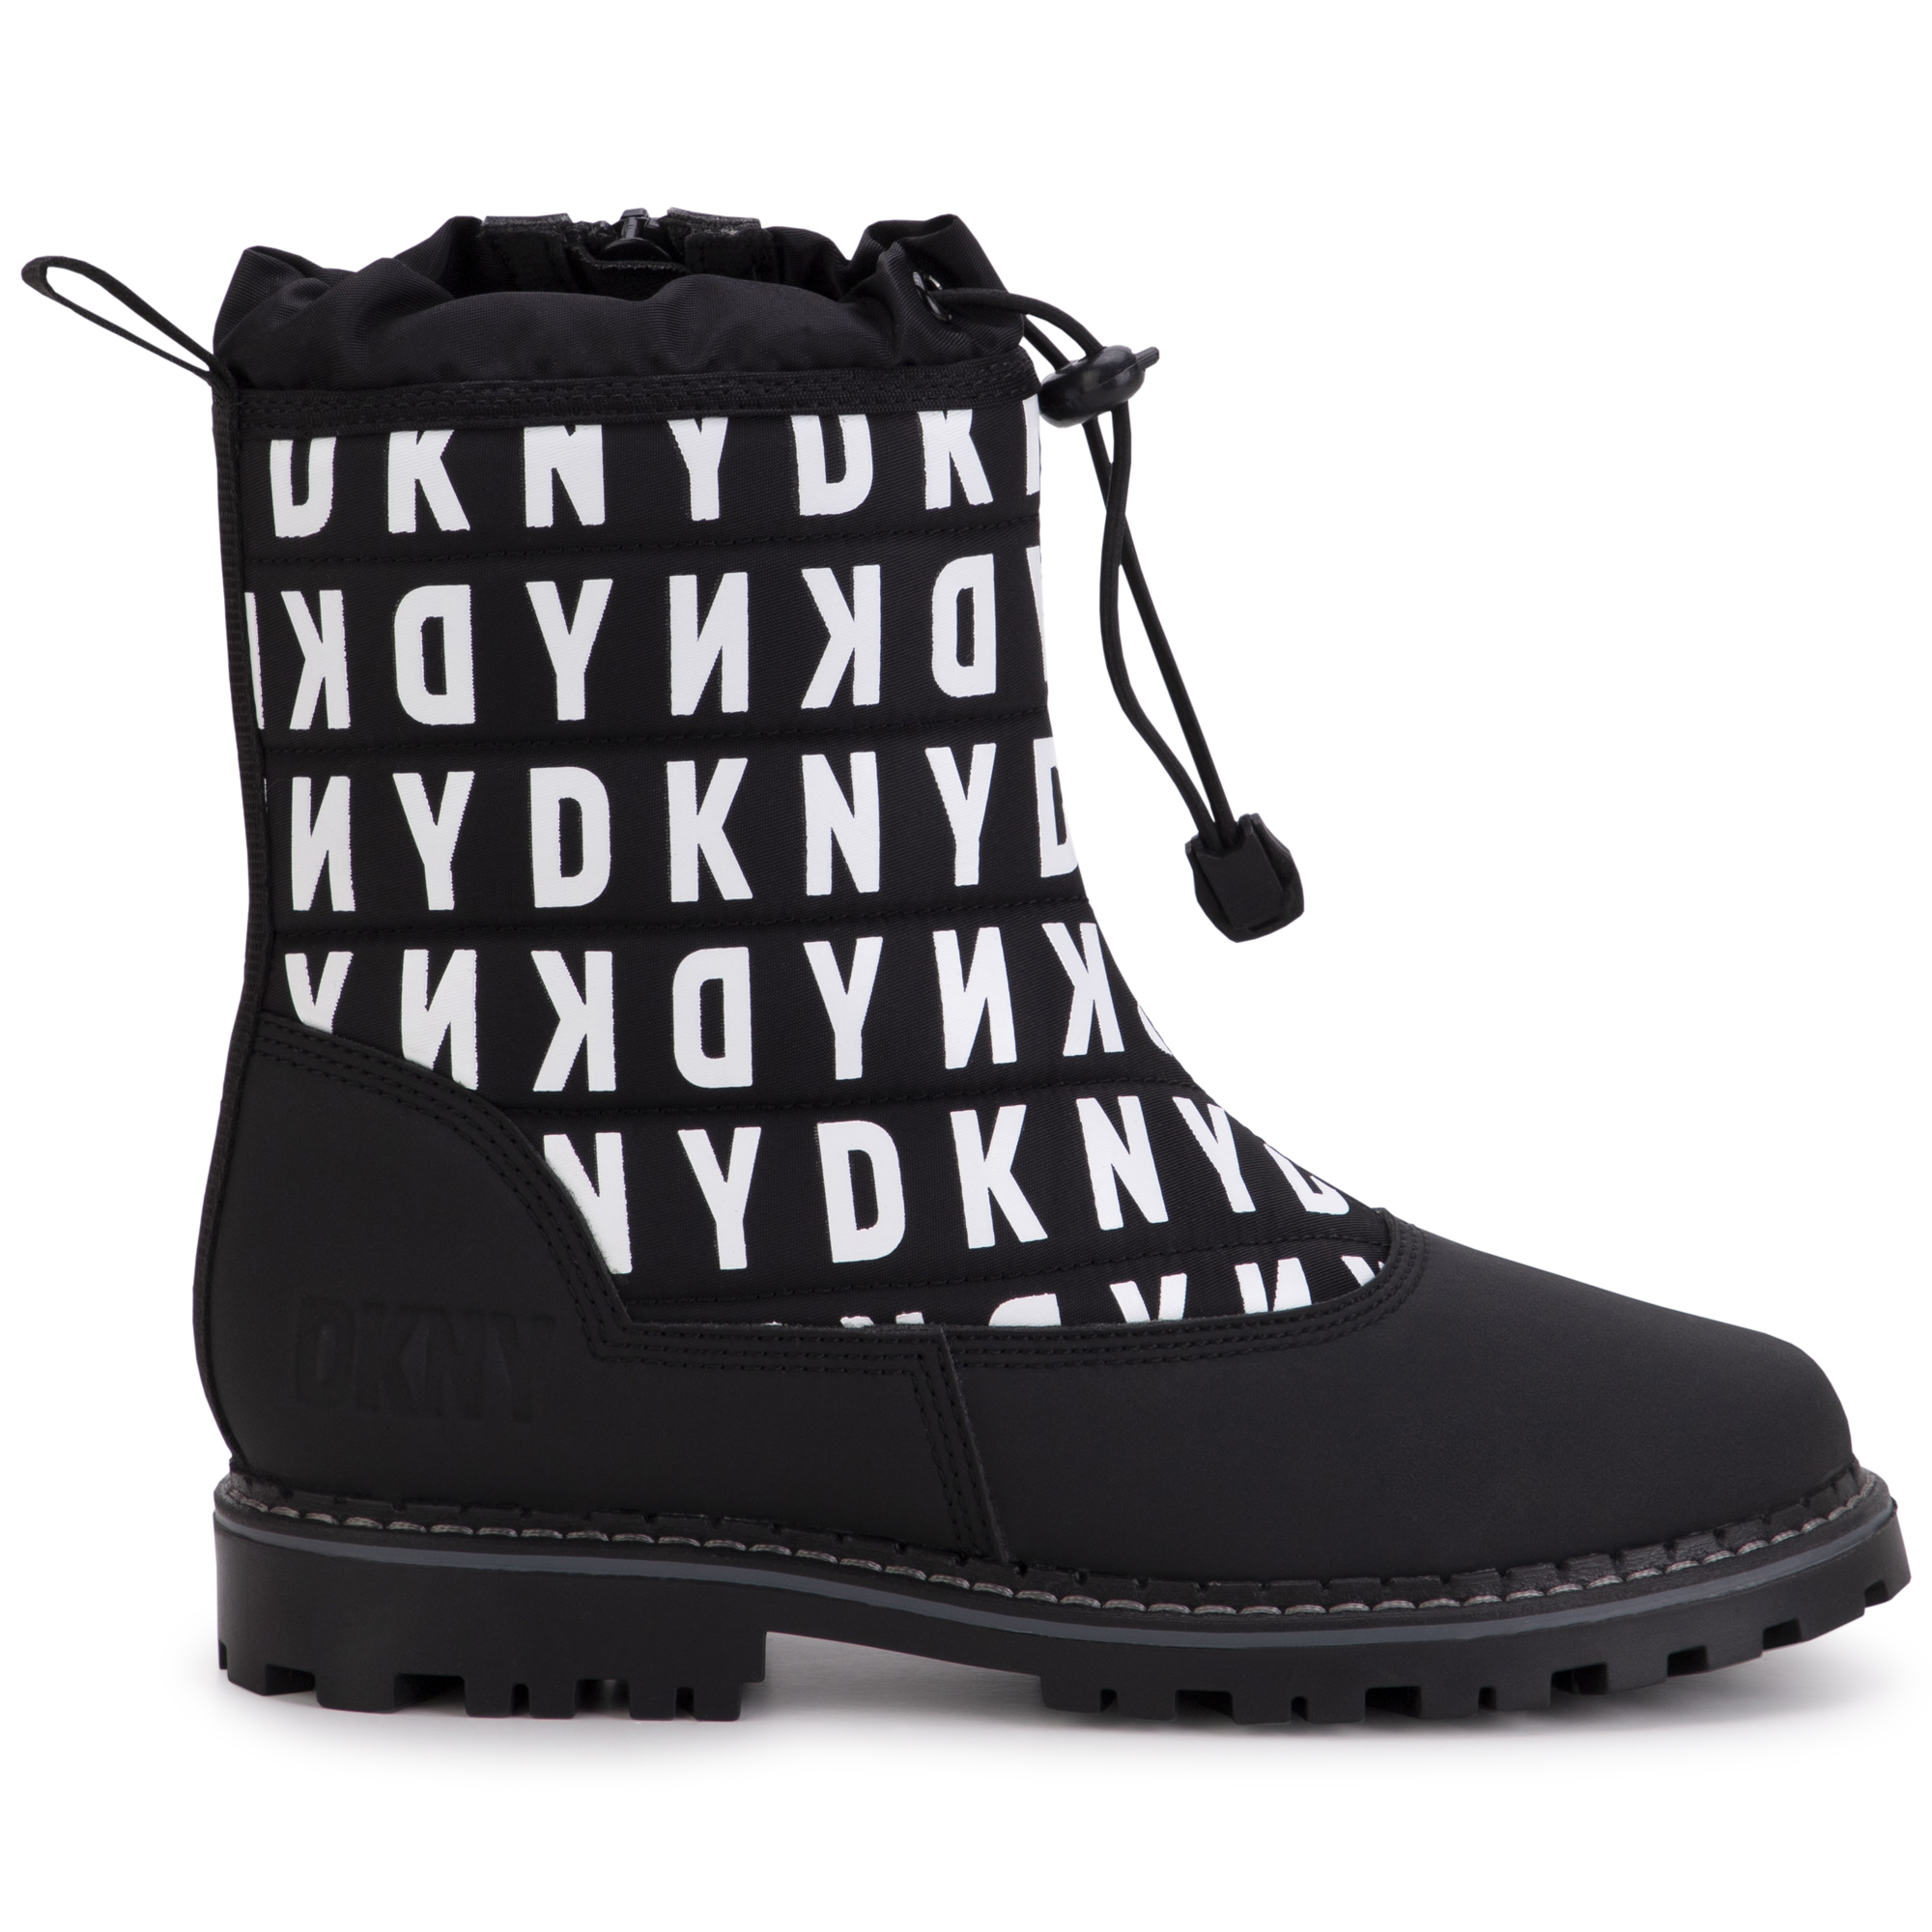 Zipped printed boots DKNY for GIRL